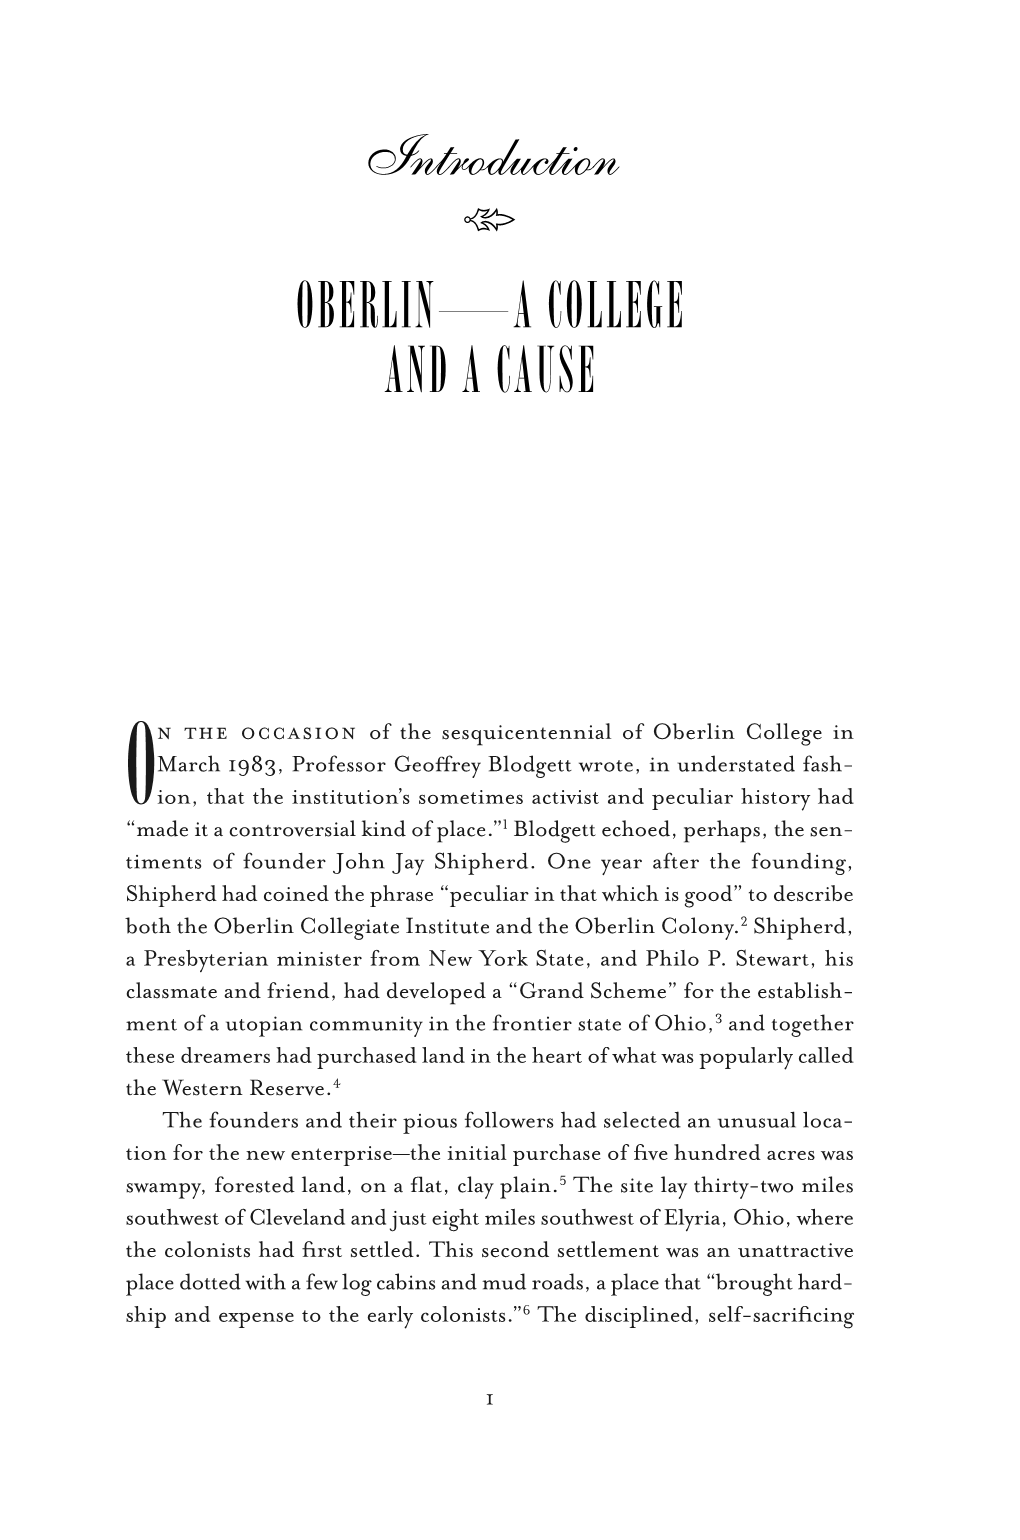 Oberlin—A College and a Cause